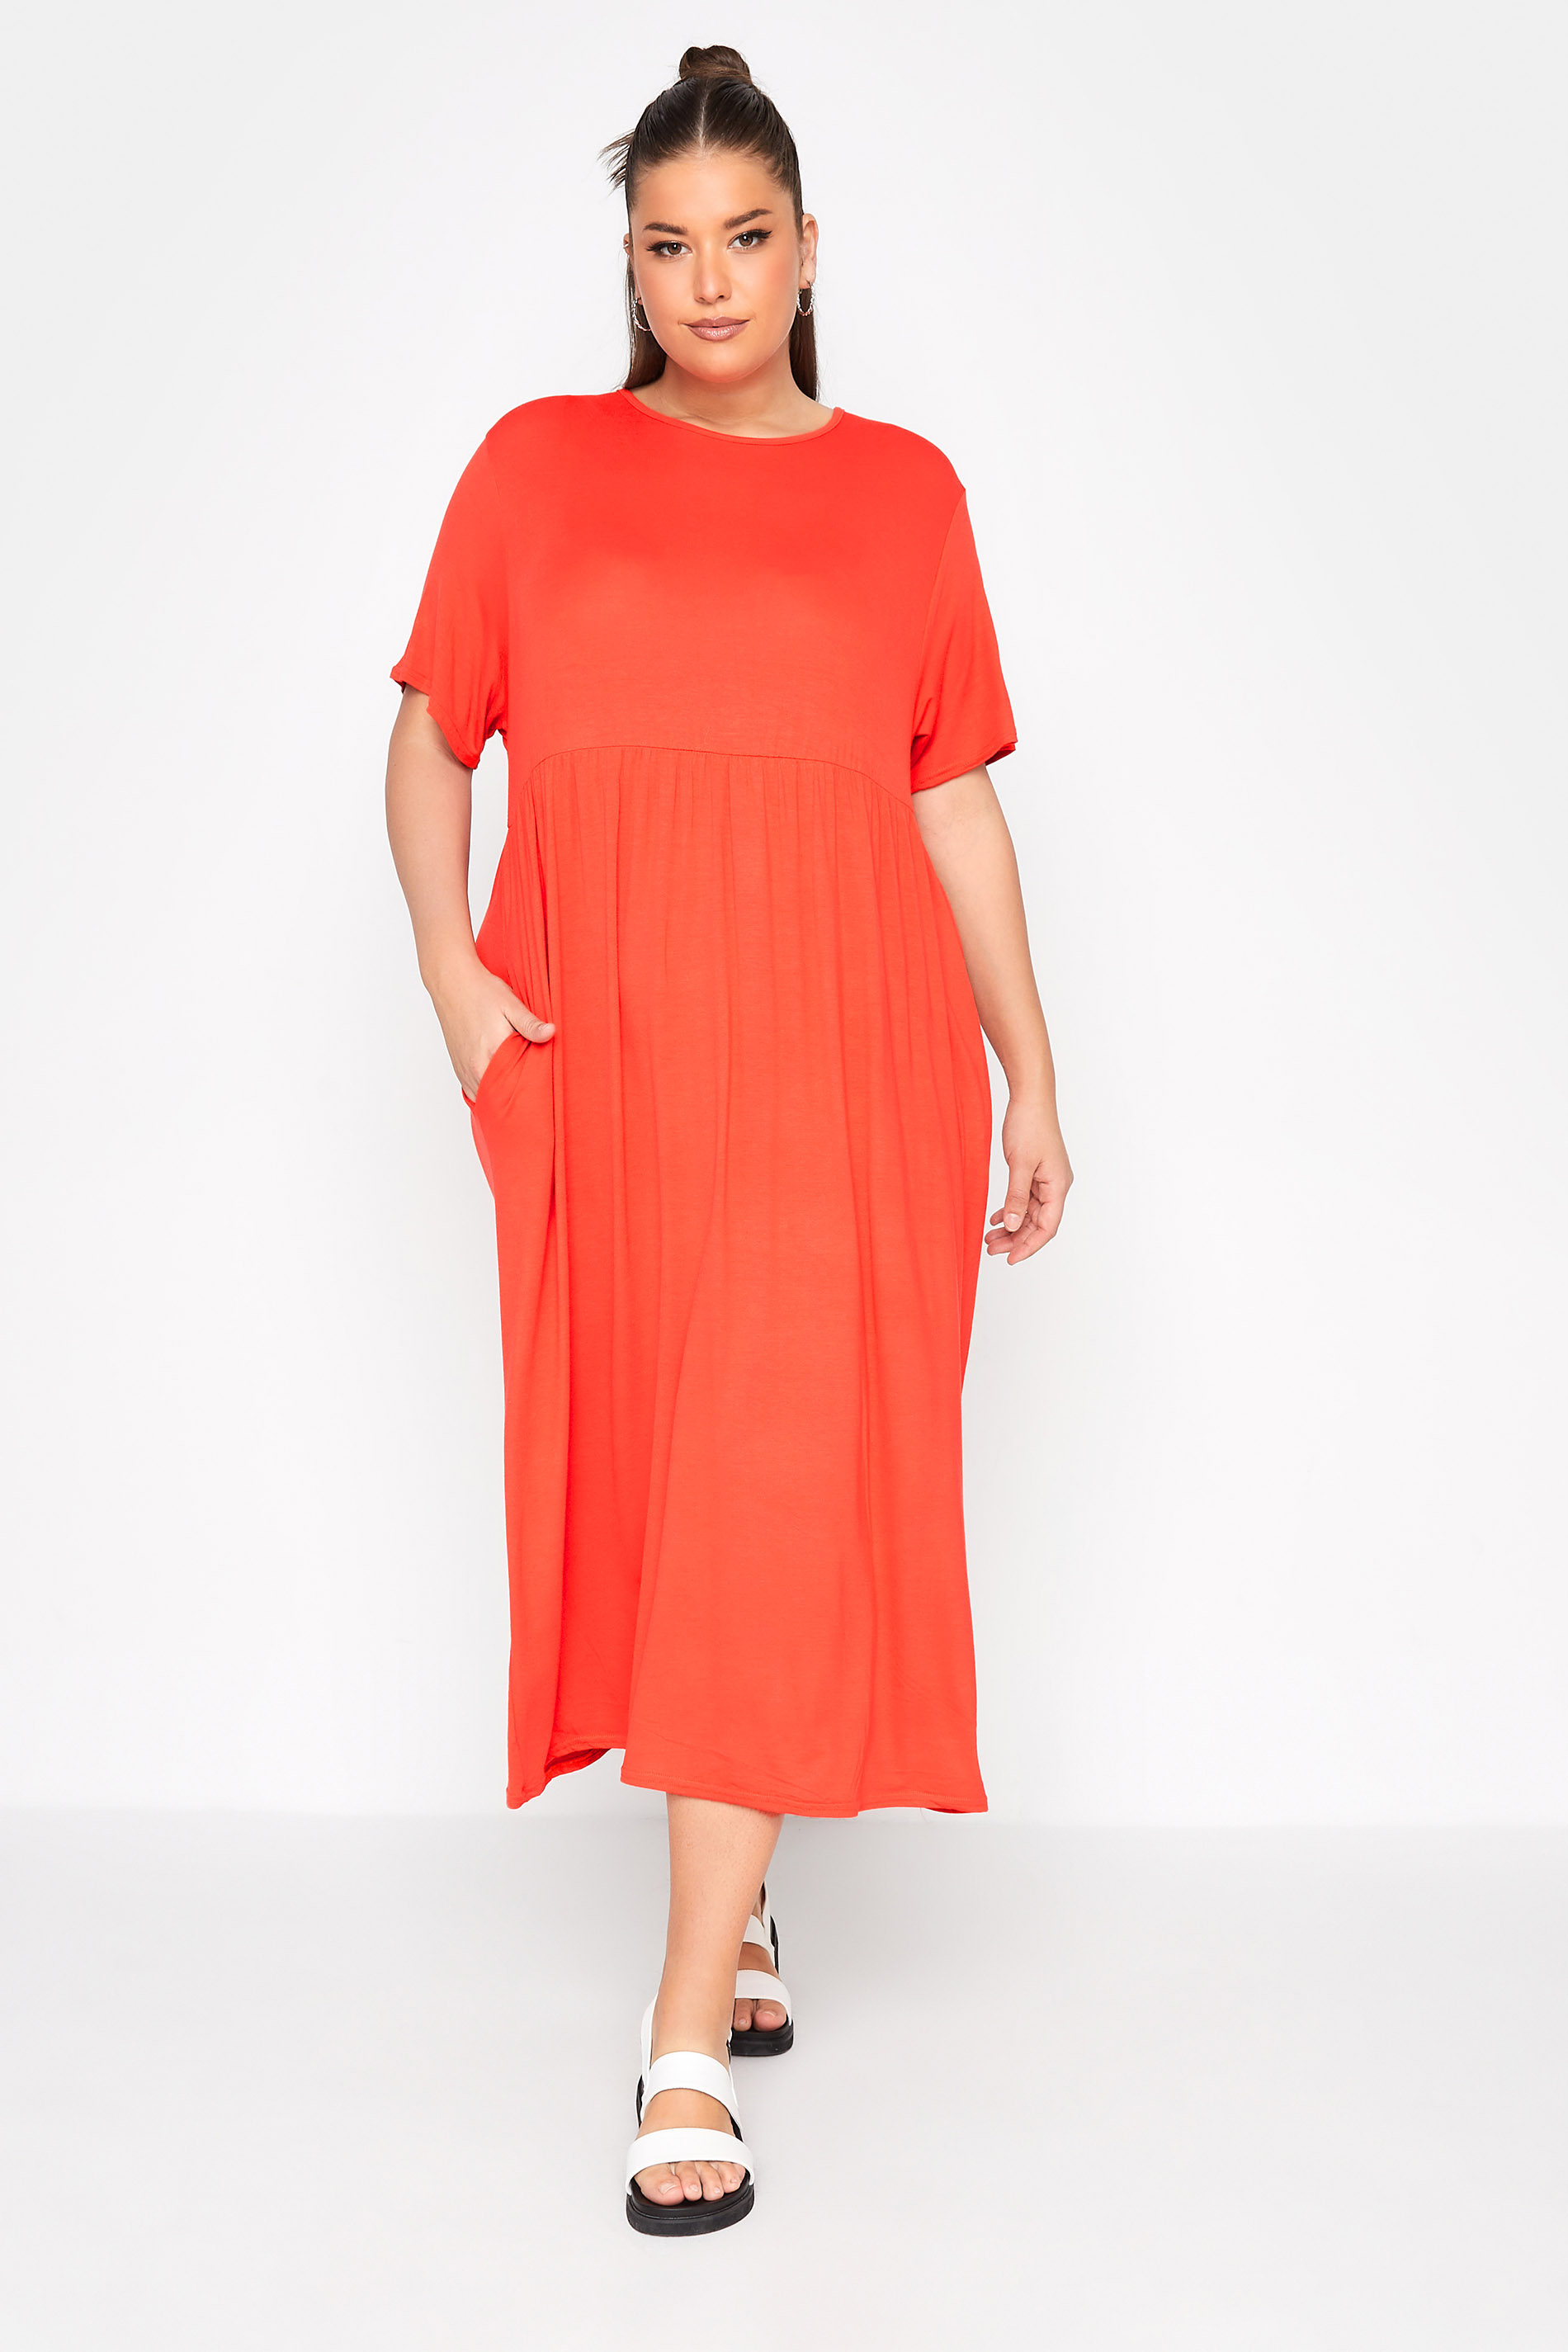 LIMITED COLLECTION Curve Orange Throw On Maxi Dress_A.jpg